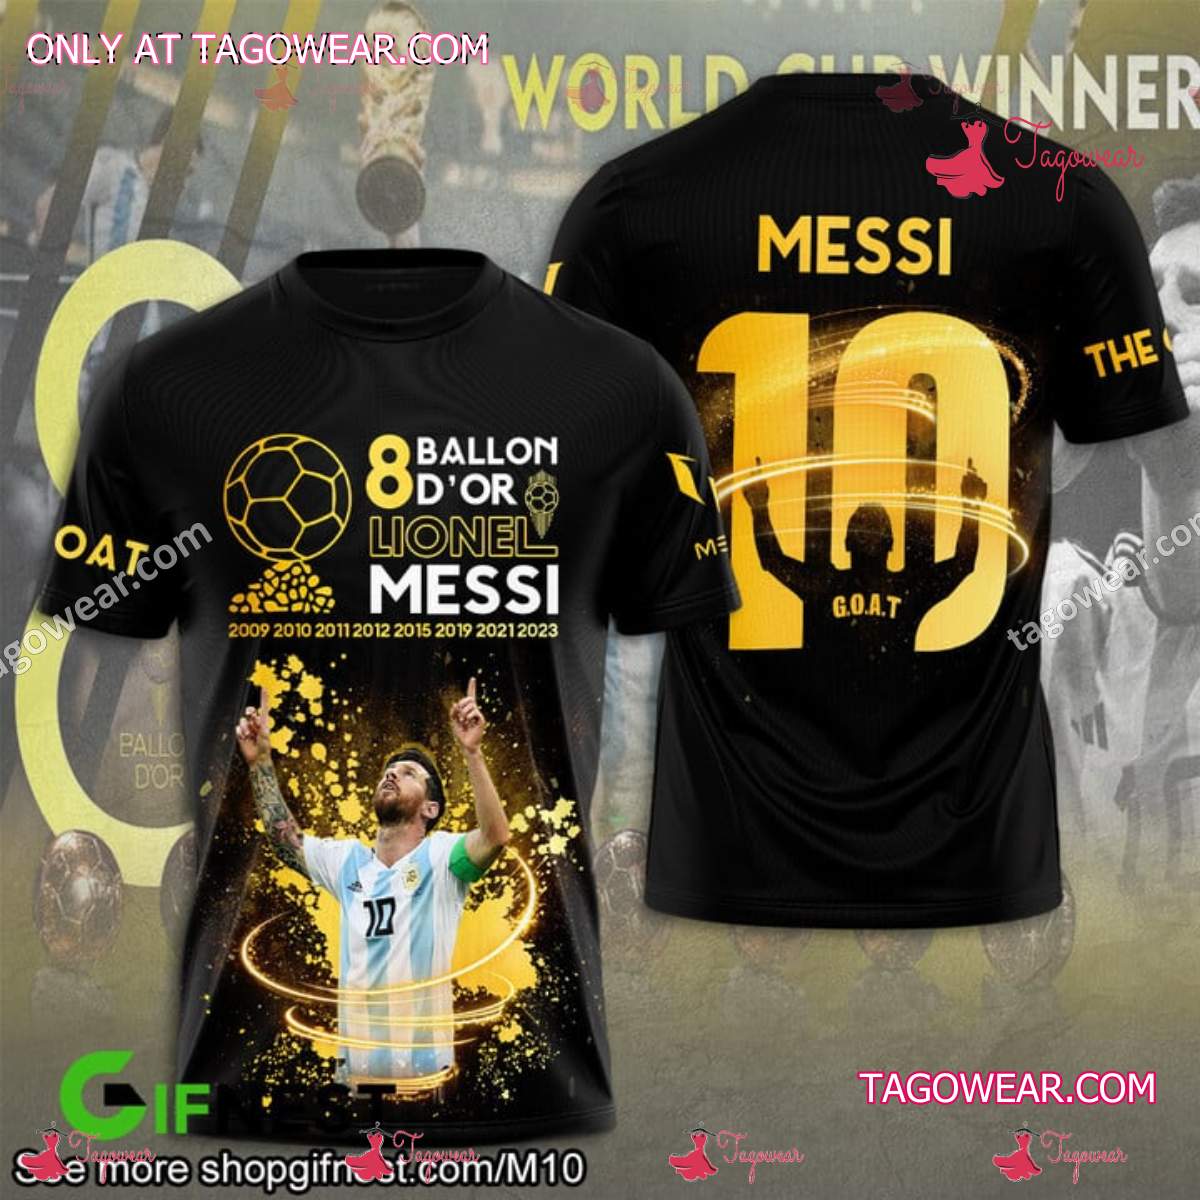 8 Ballon D'or Lionel Messi The Goat T-shirt, Hoodie